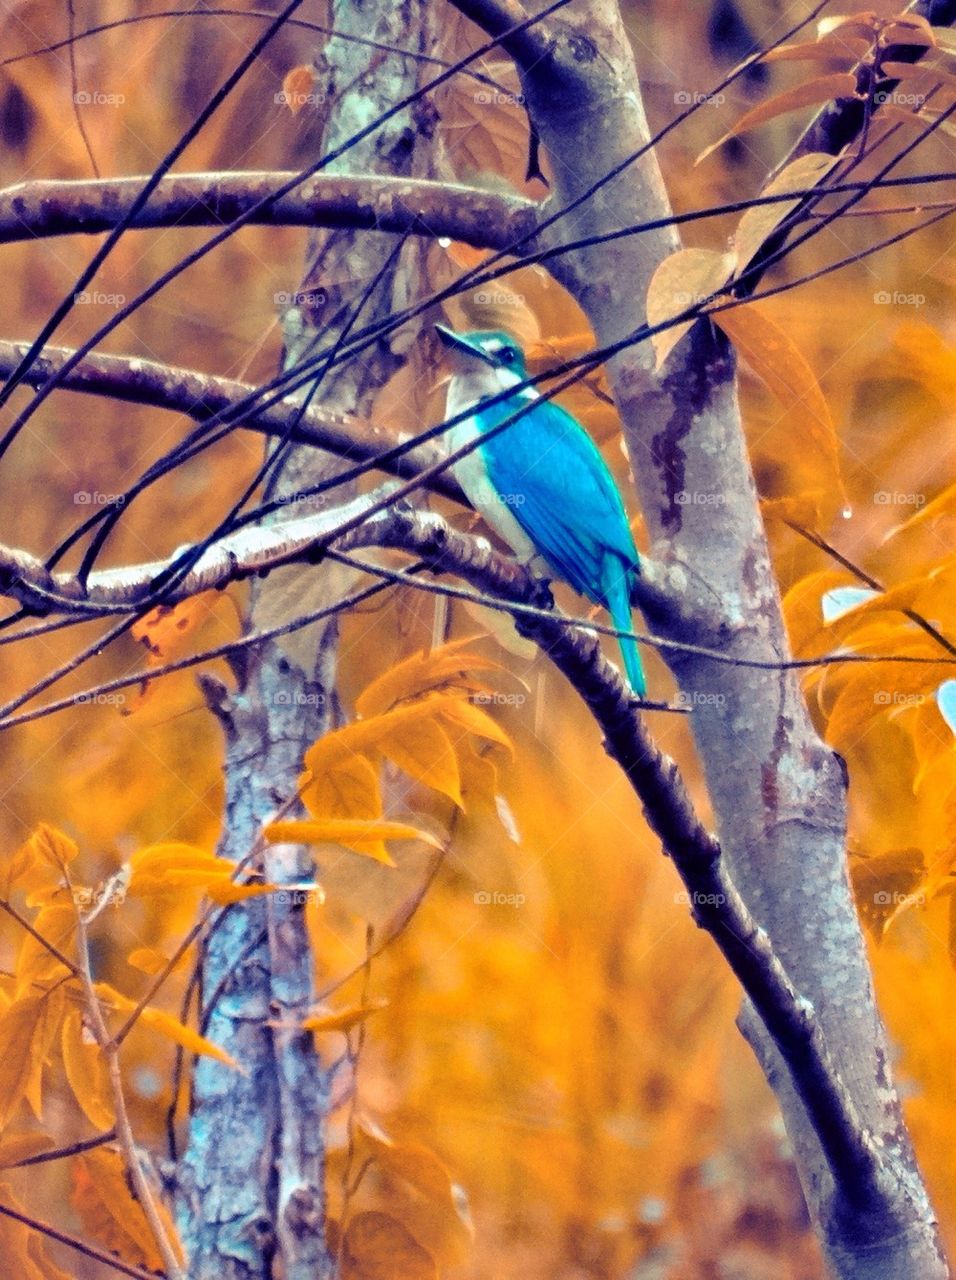 Kingfisher on tree branch